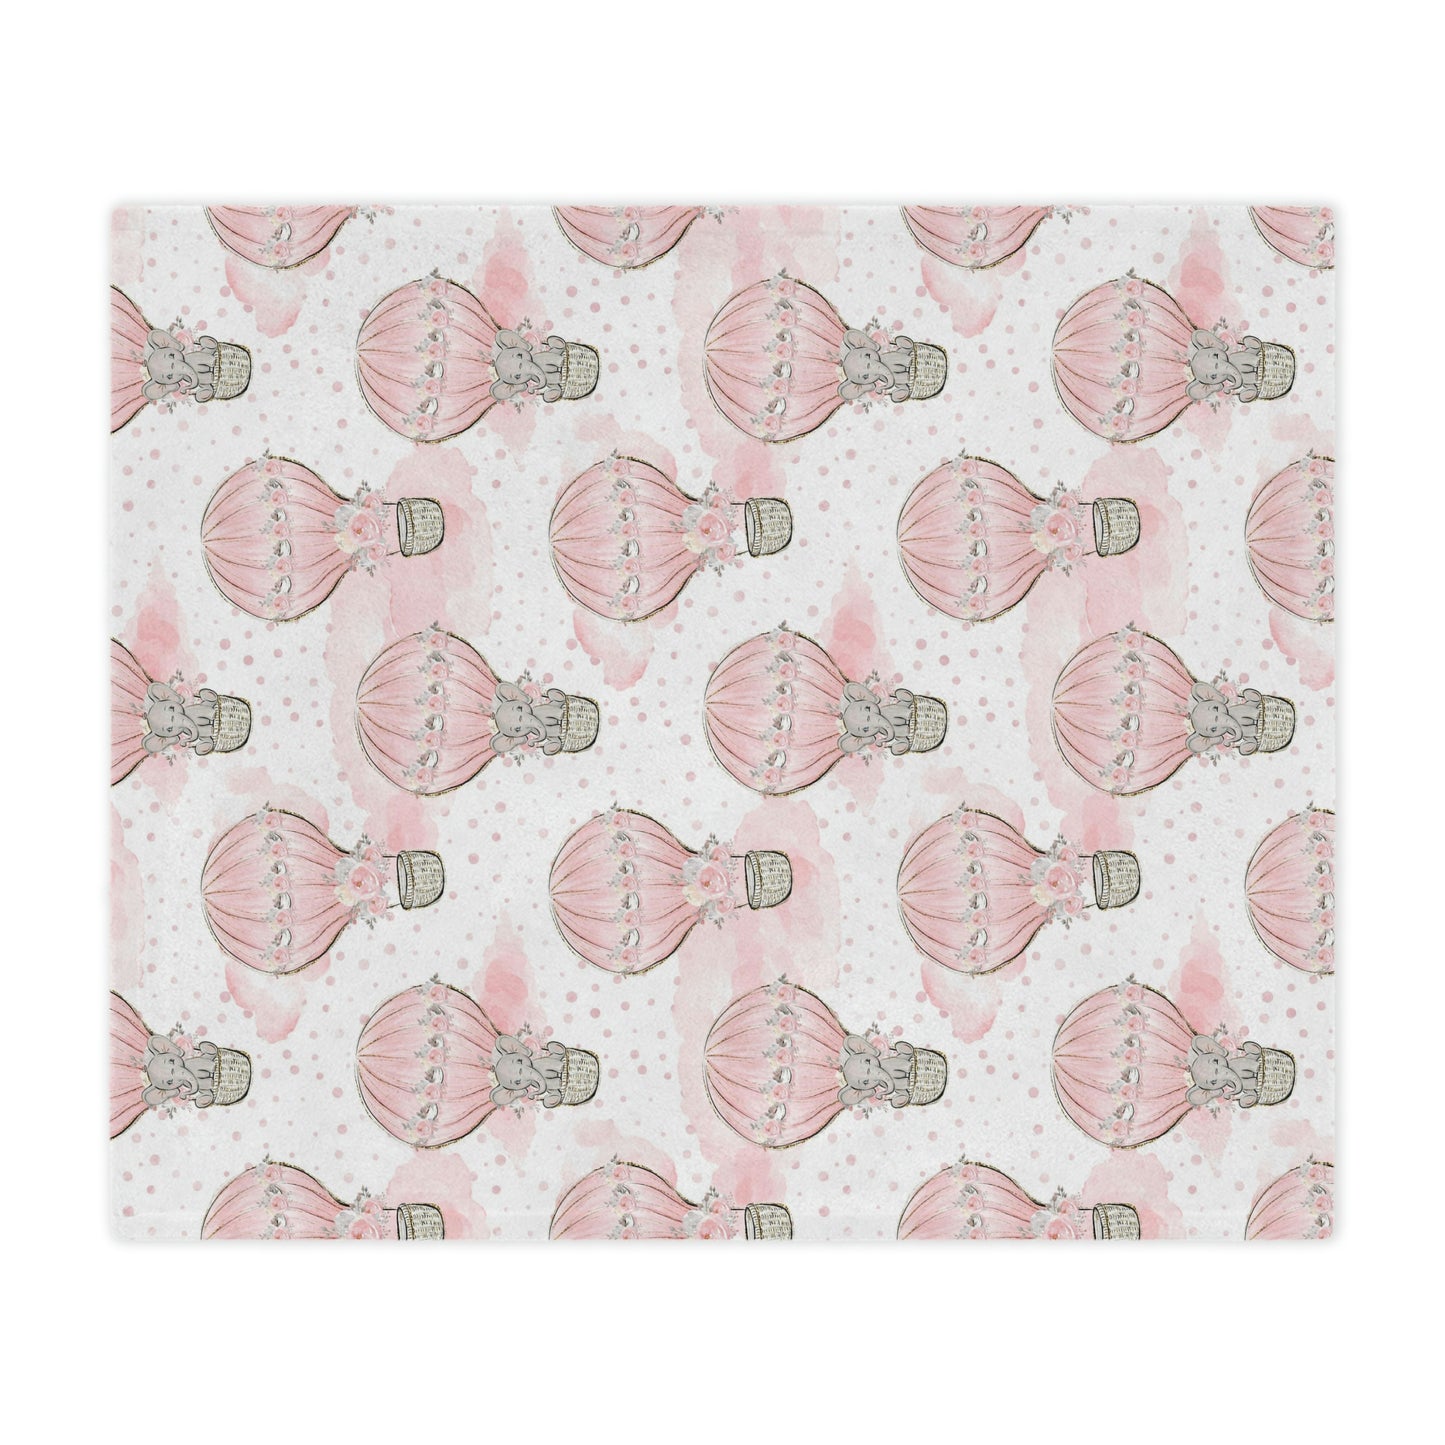 pink elephant in a hot air balloon baby blanket decorating a nursery, pink elephant throw blanket with hot air balloons on it lying on a bed, elephant nursery theme decor blanket accenting a nursery bed